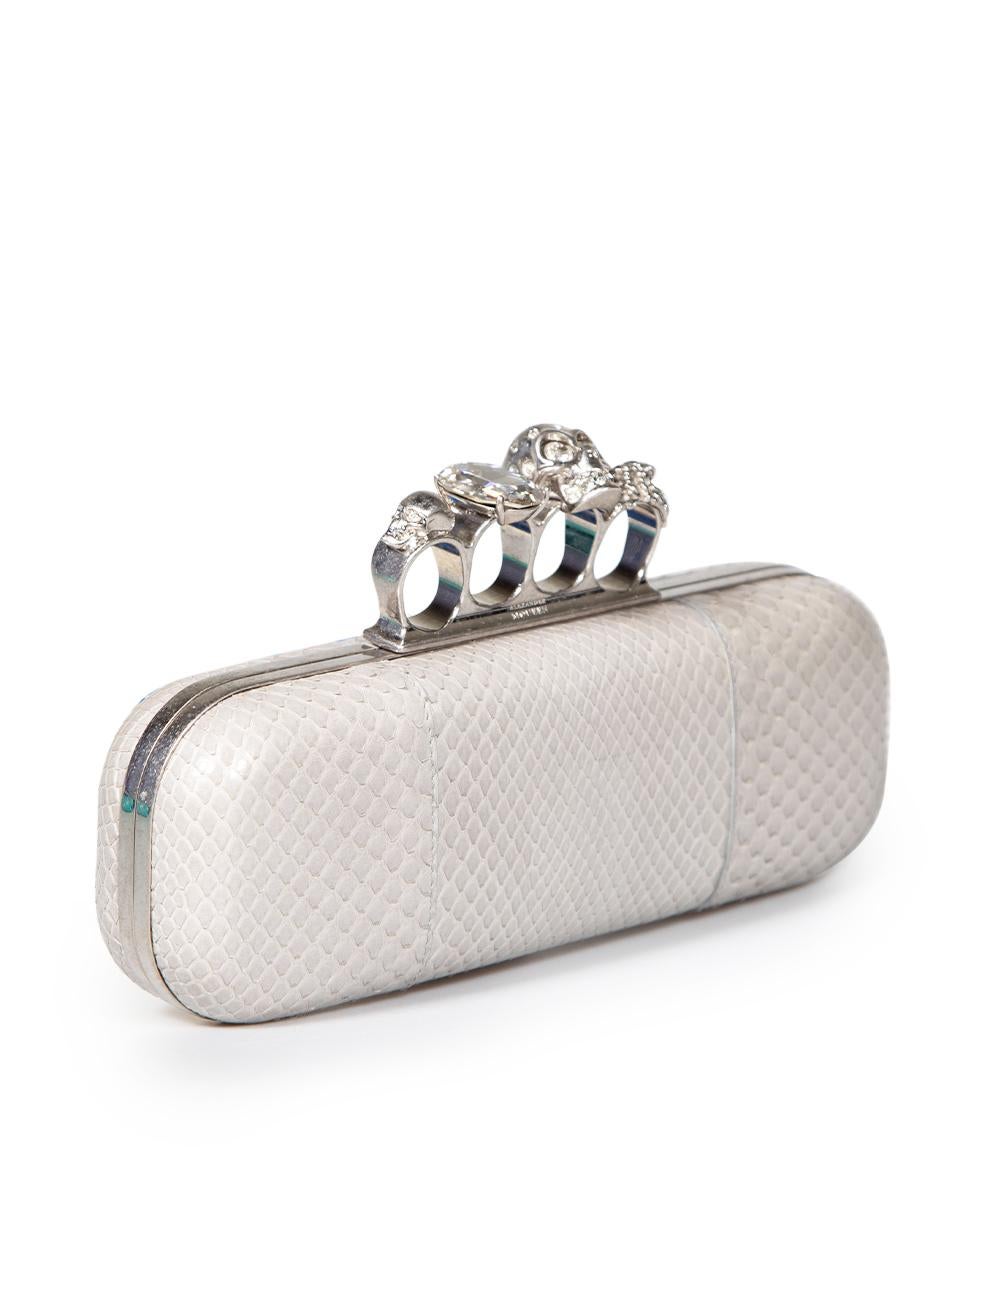 CONDITION is Very good. Minimal wear to clutch is evident. Minimal wear to the back with dark marks and the hardware at the trim and knuckle detail has scratches to the metal on this used Alexander McQueen designer resale item.
 
 
 
 Details
 
 
